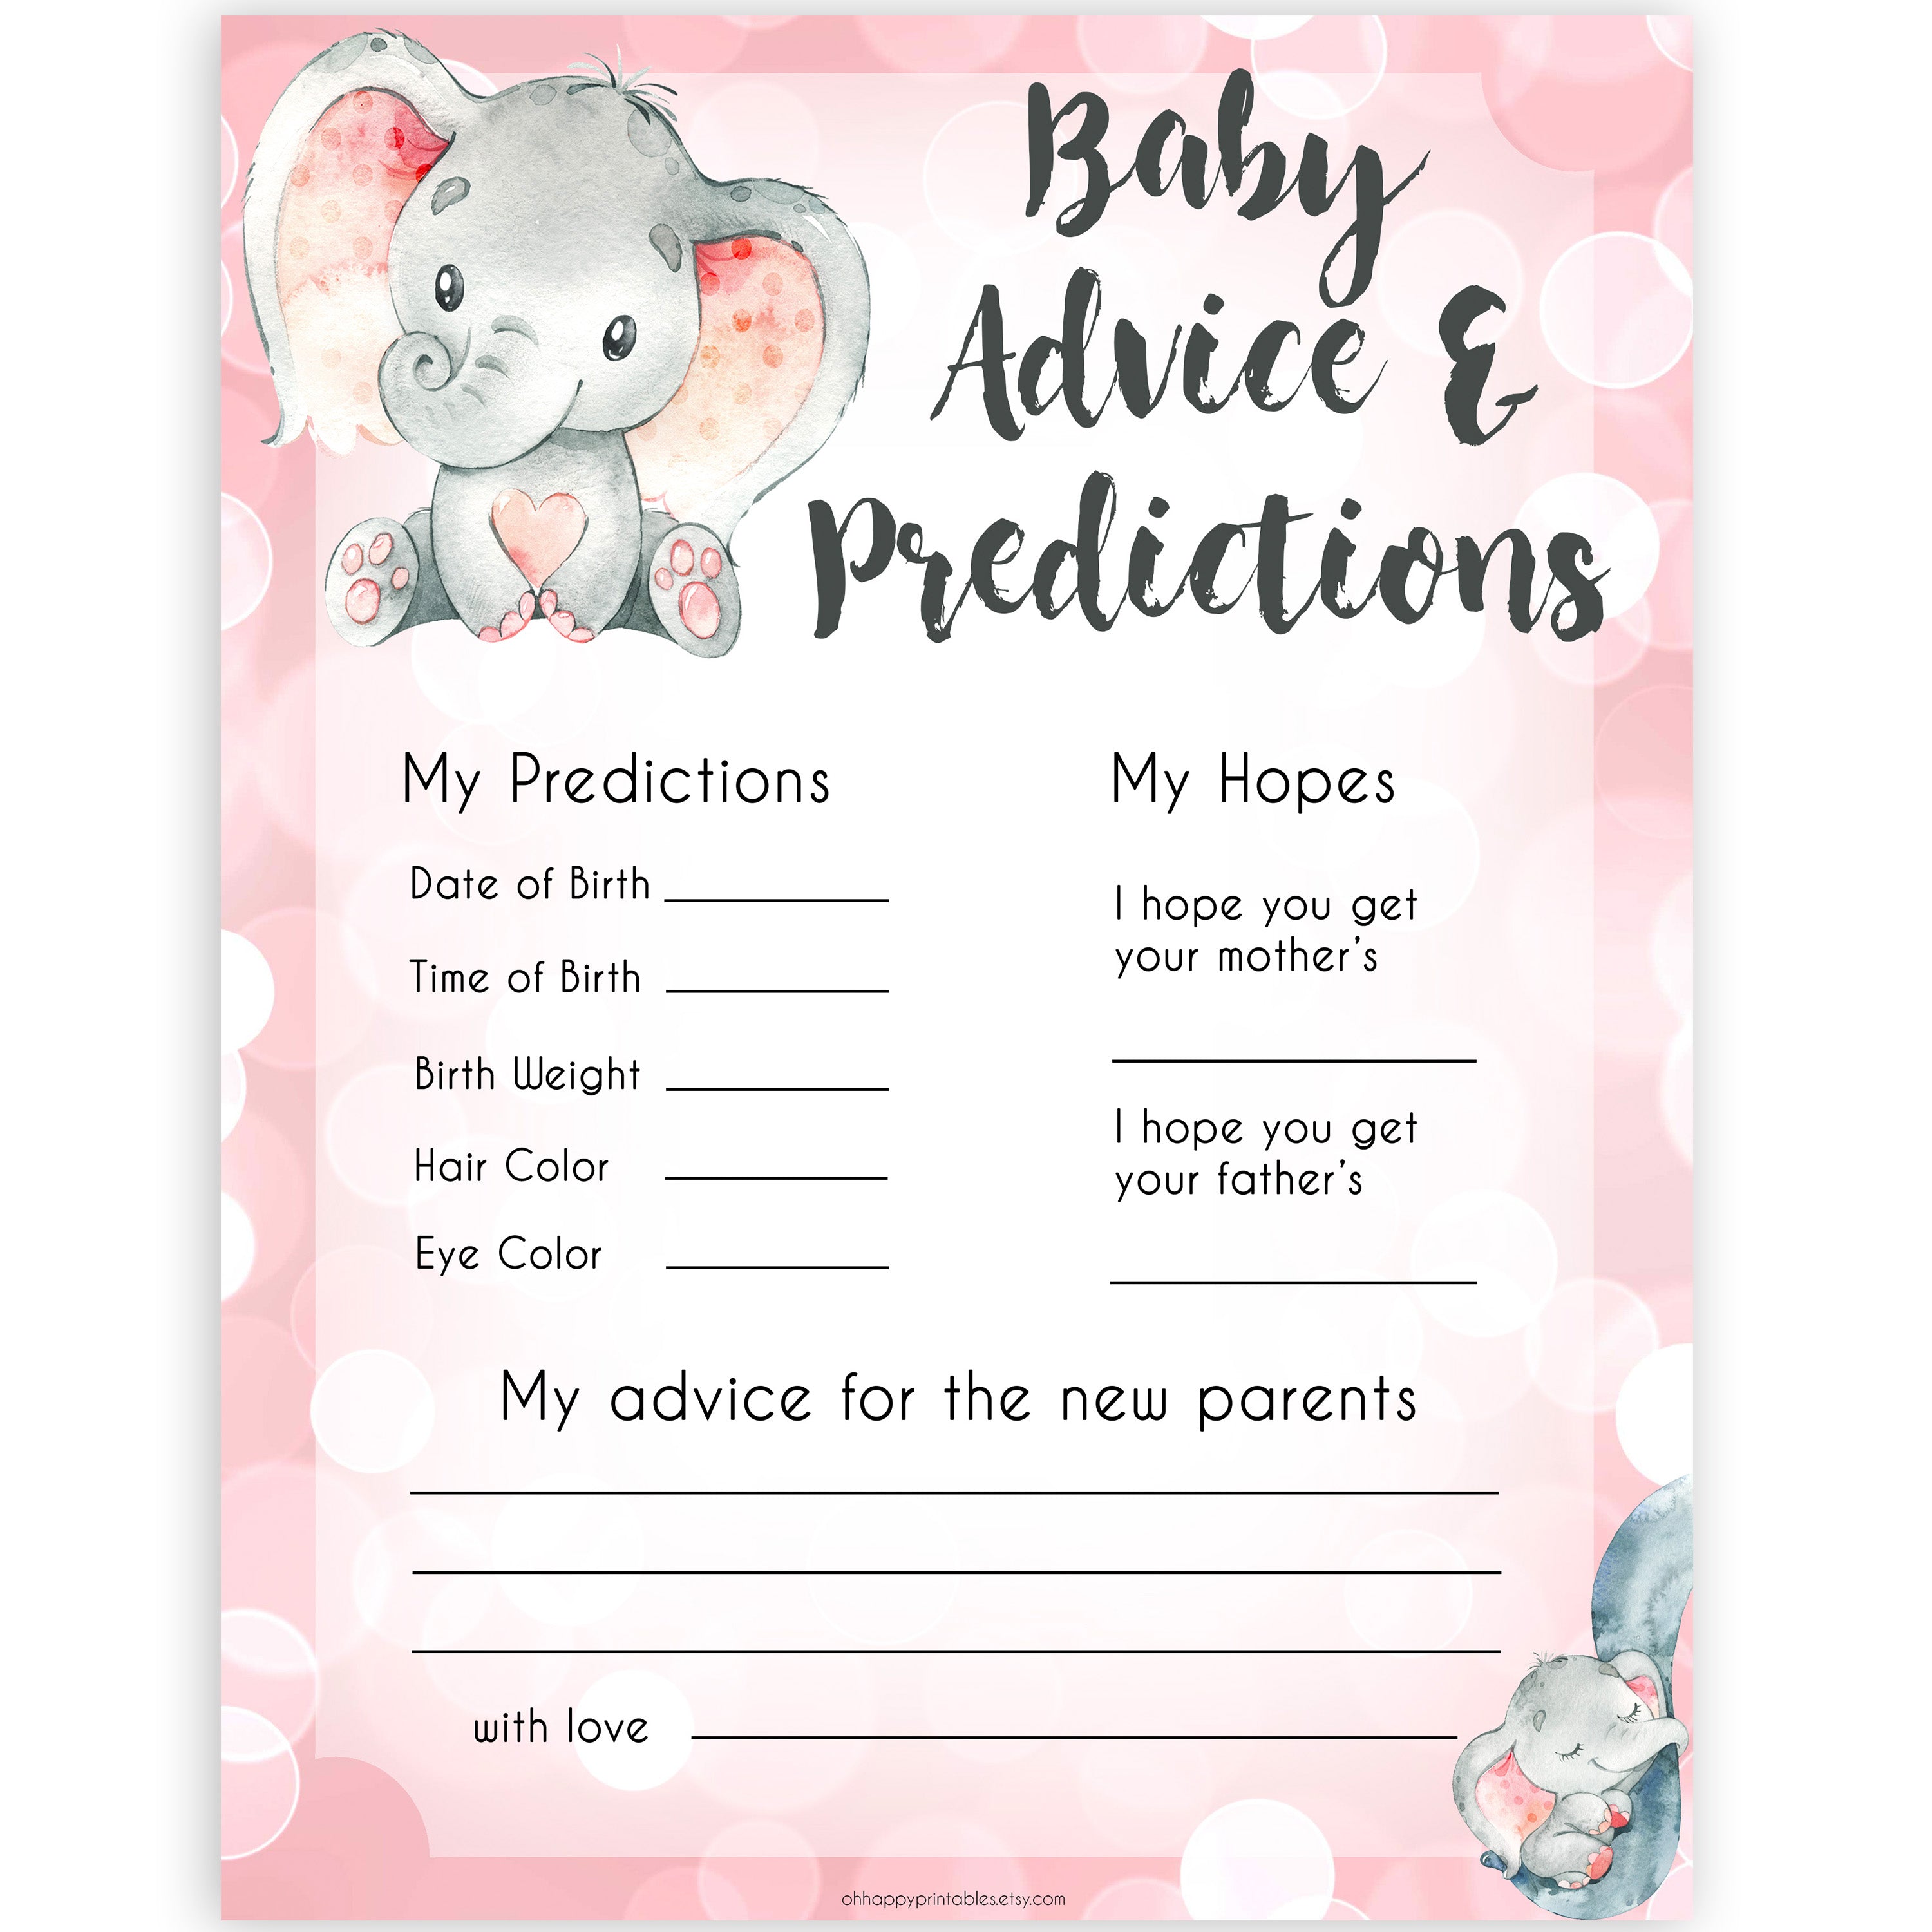 pink elephant baby games, baby advice and predictions baby shower games, printable baby shower games, baby shower games, fun baby games, popular baby games, pink baby games